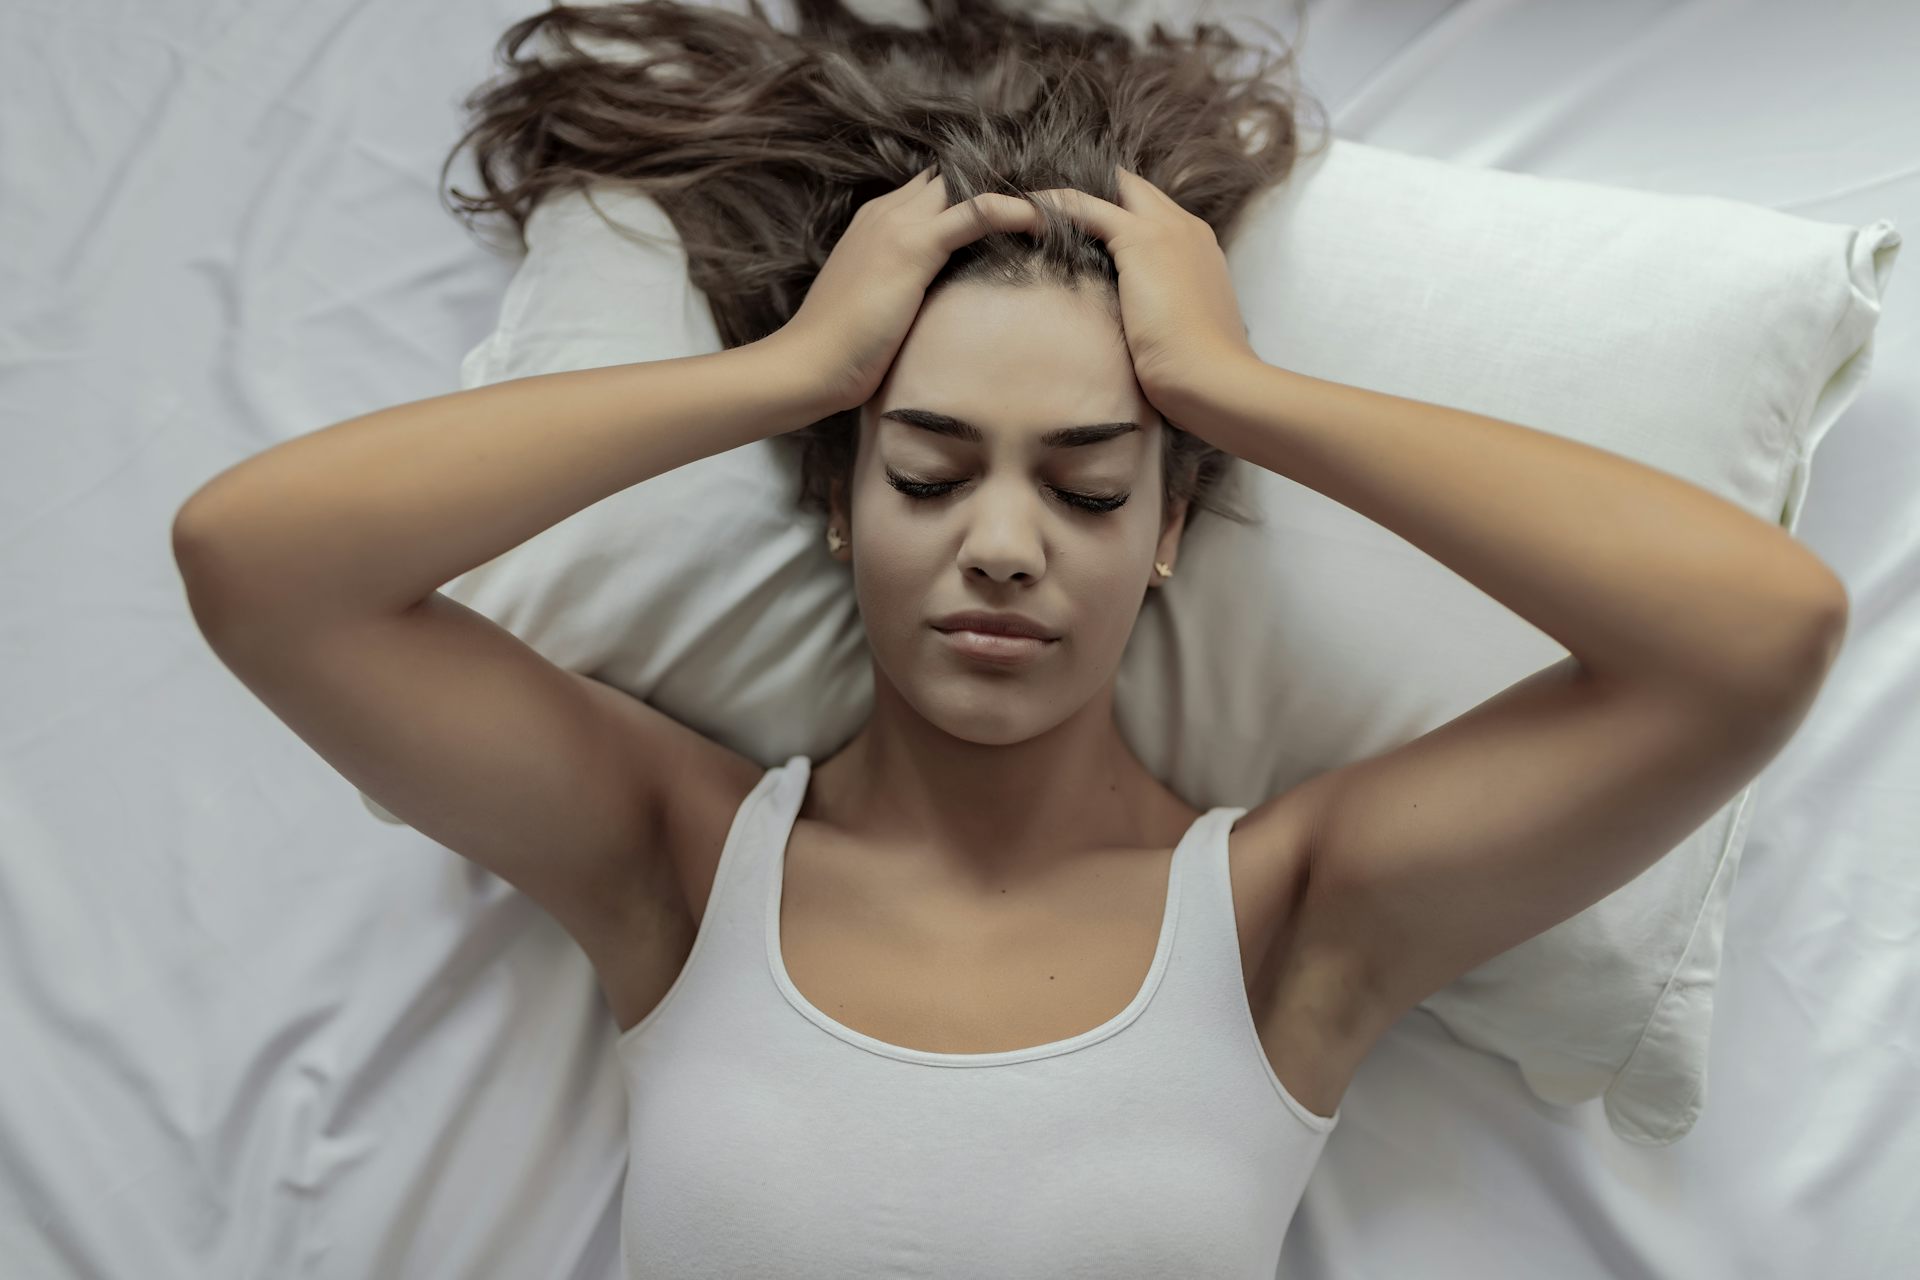 Women get far more migraines than picture